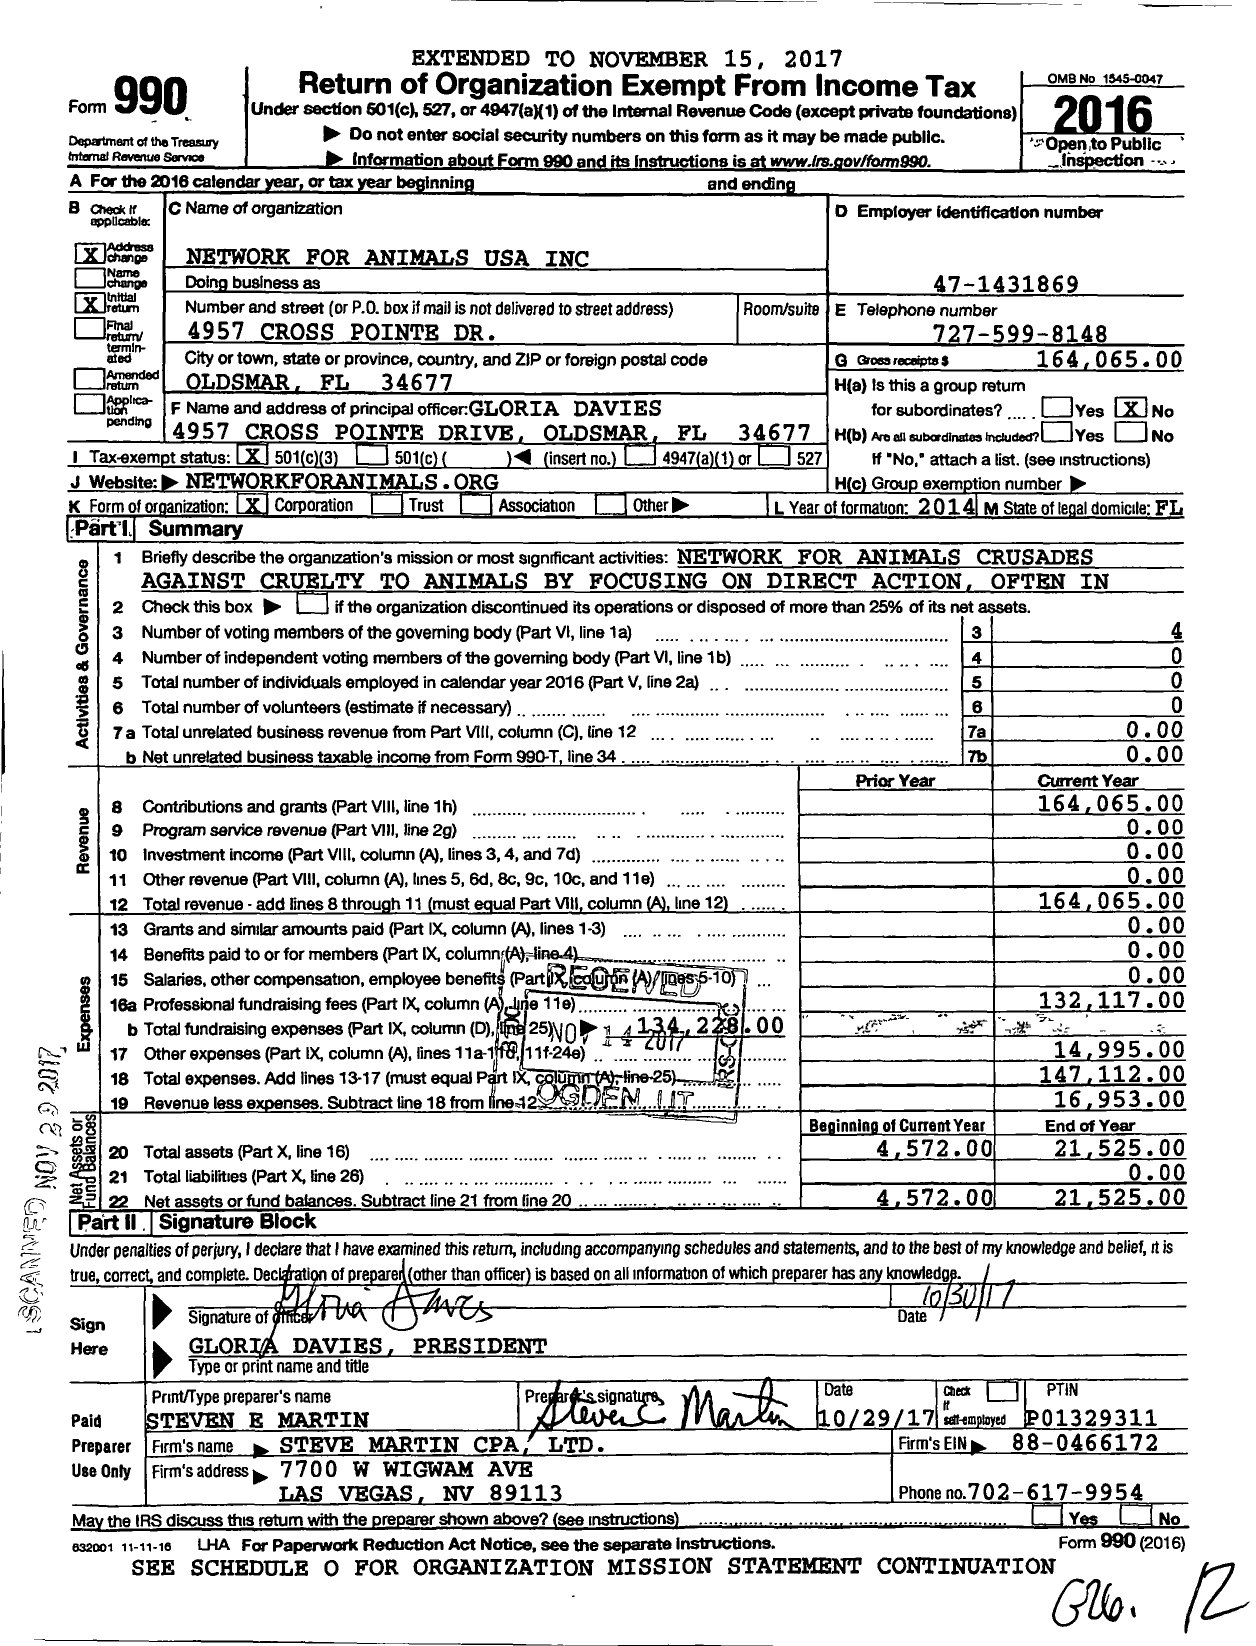 Image of first page of 2016 Form 990 for Network for Animals USA